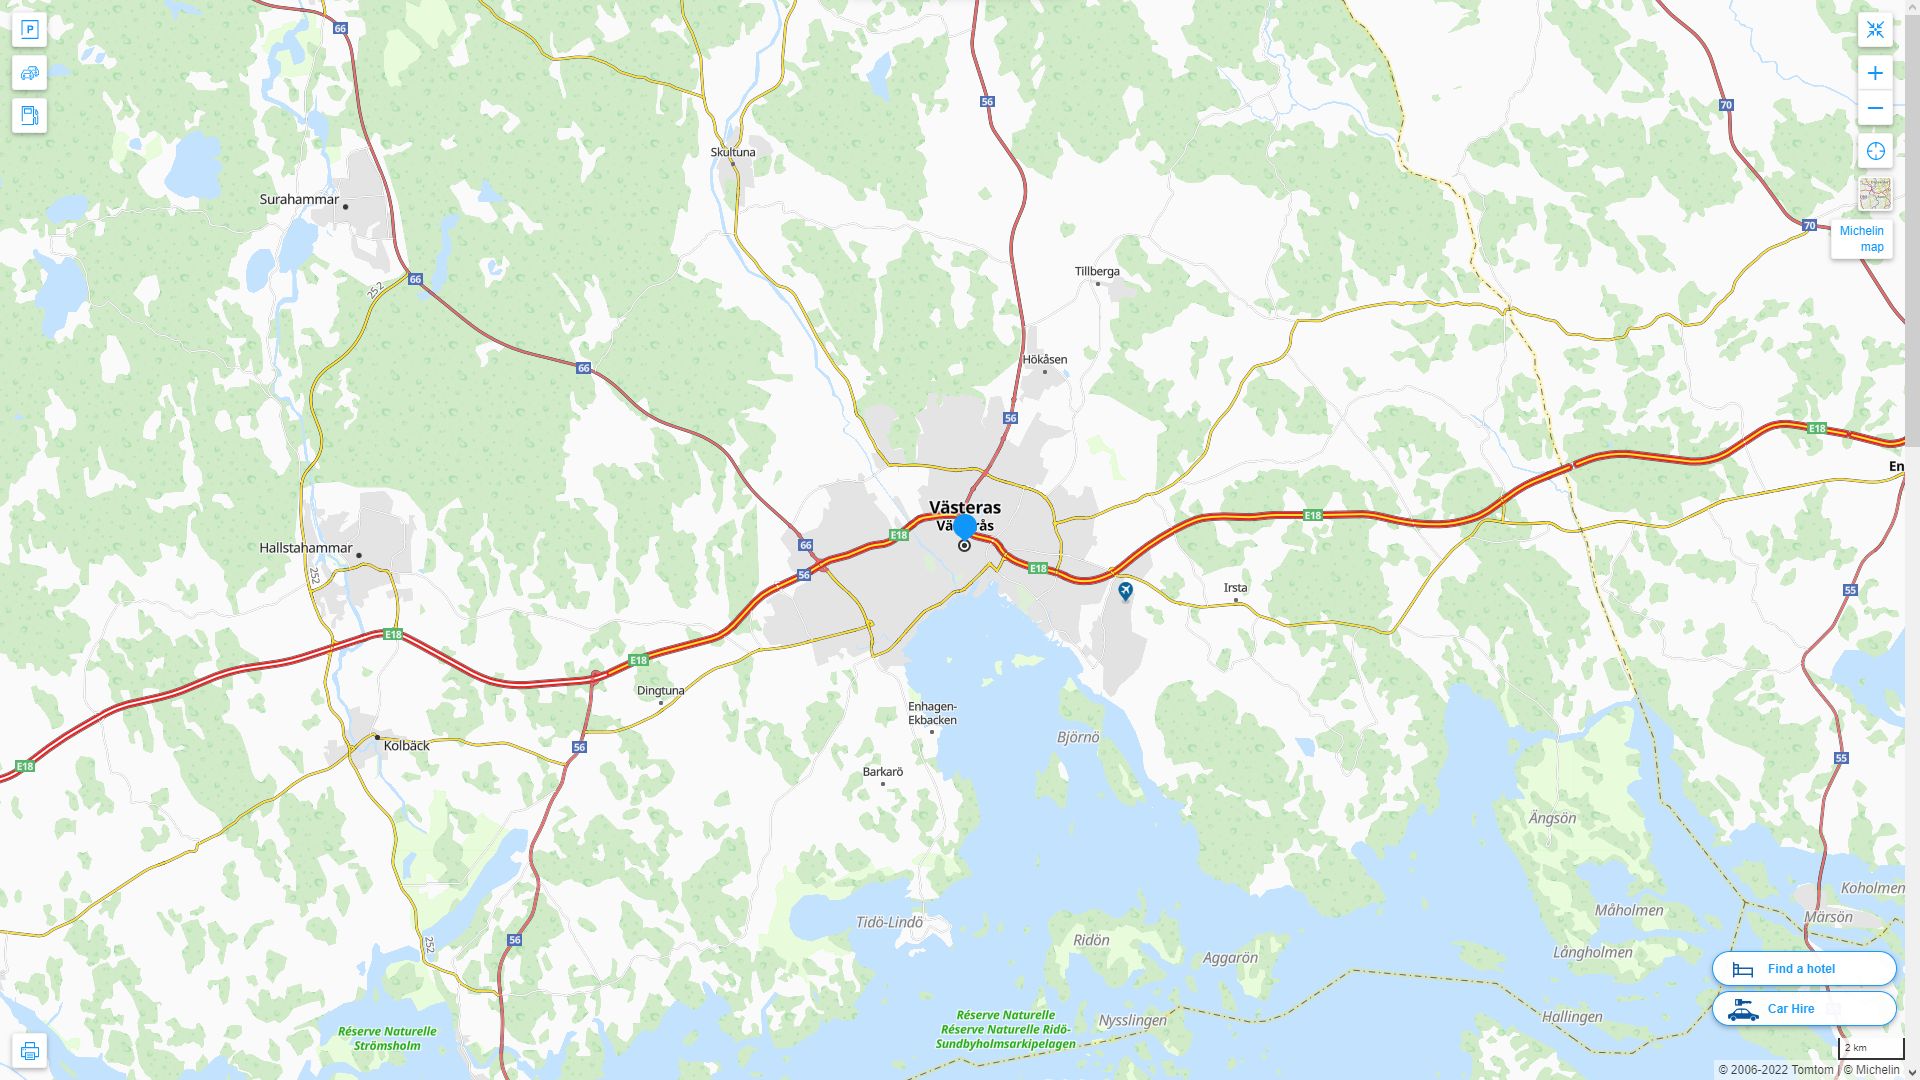 Vasteras Highway and Road Map